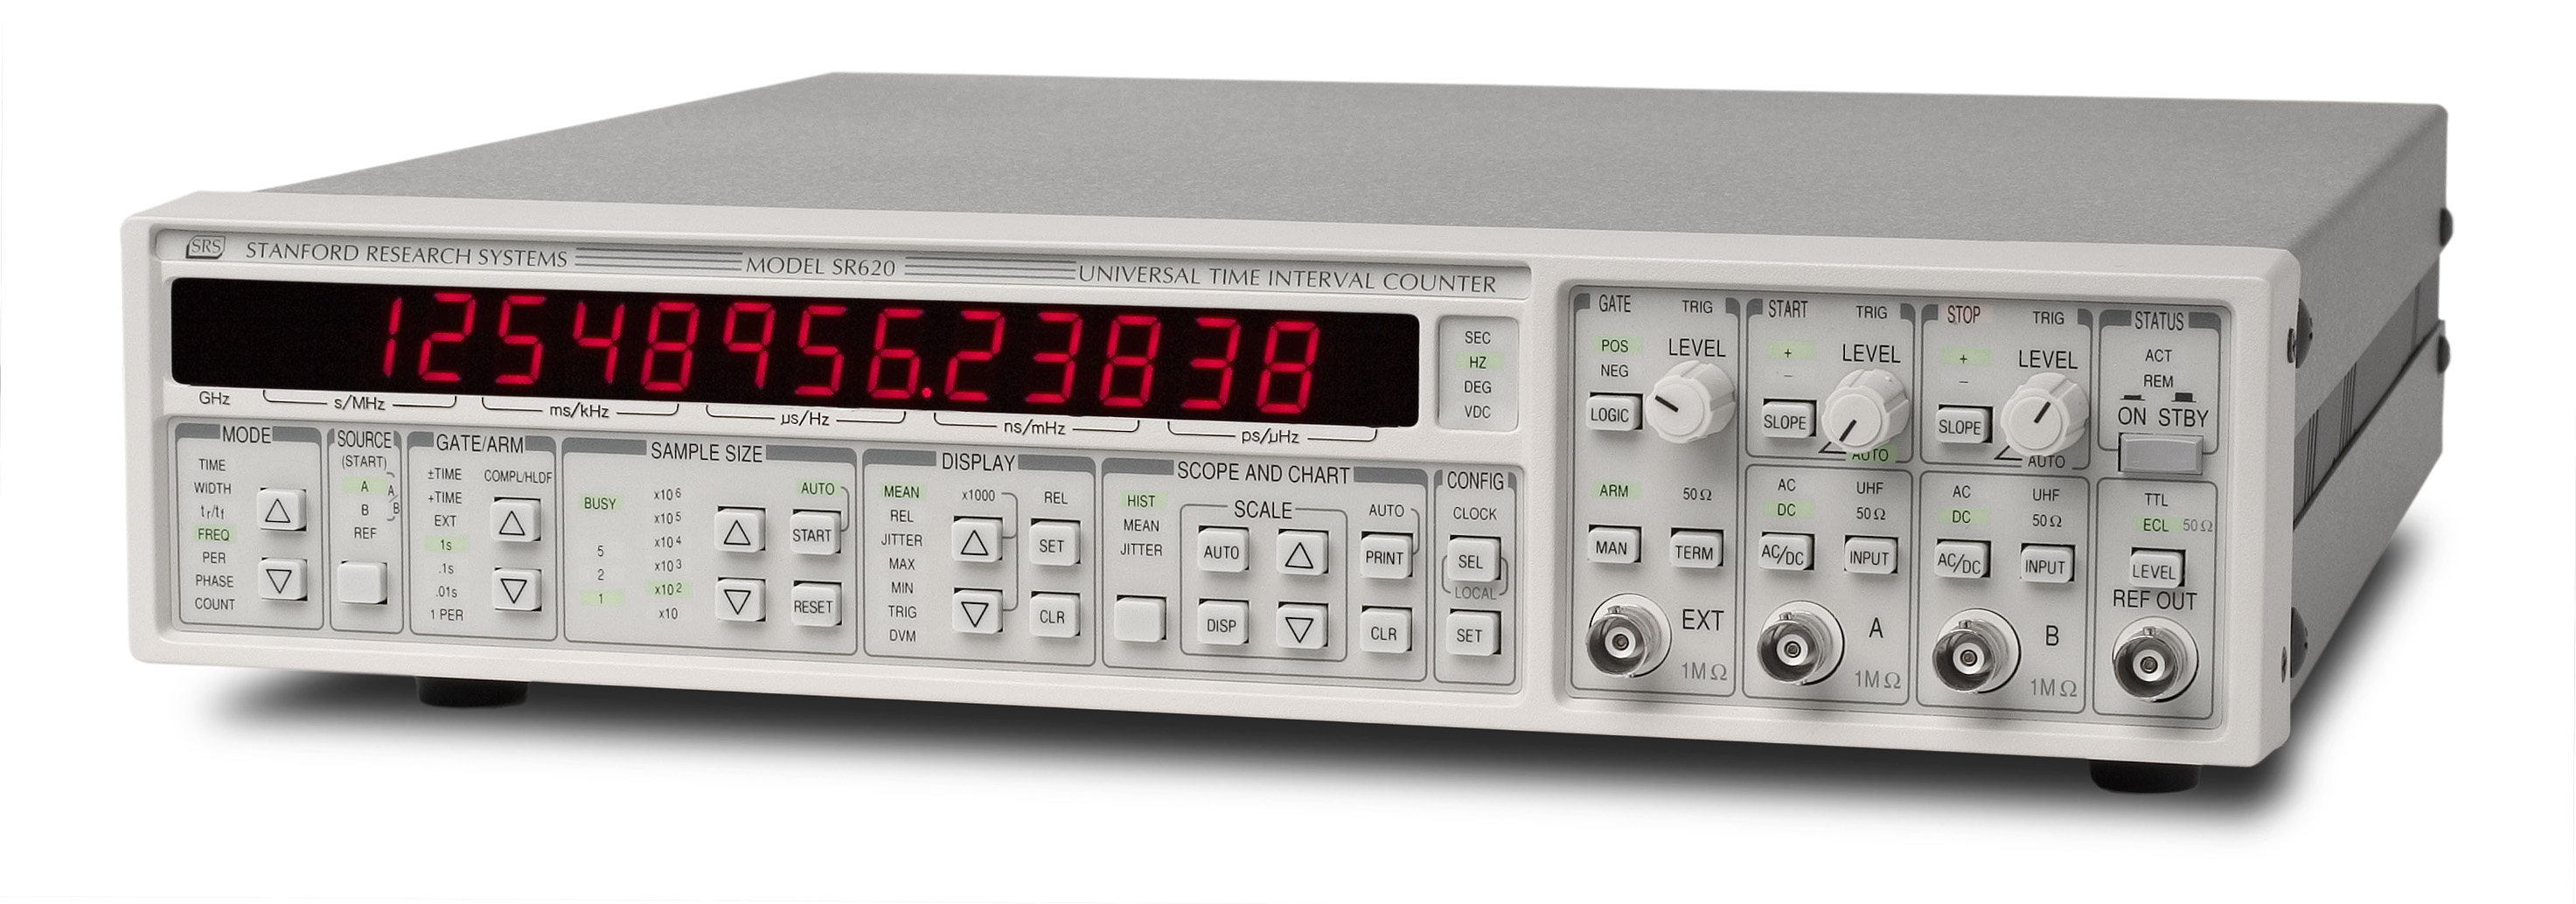 SR620 - Stanford Research Frequency Counter